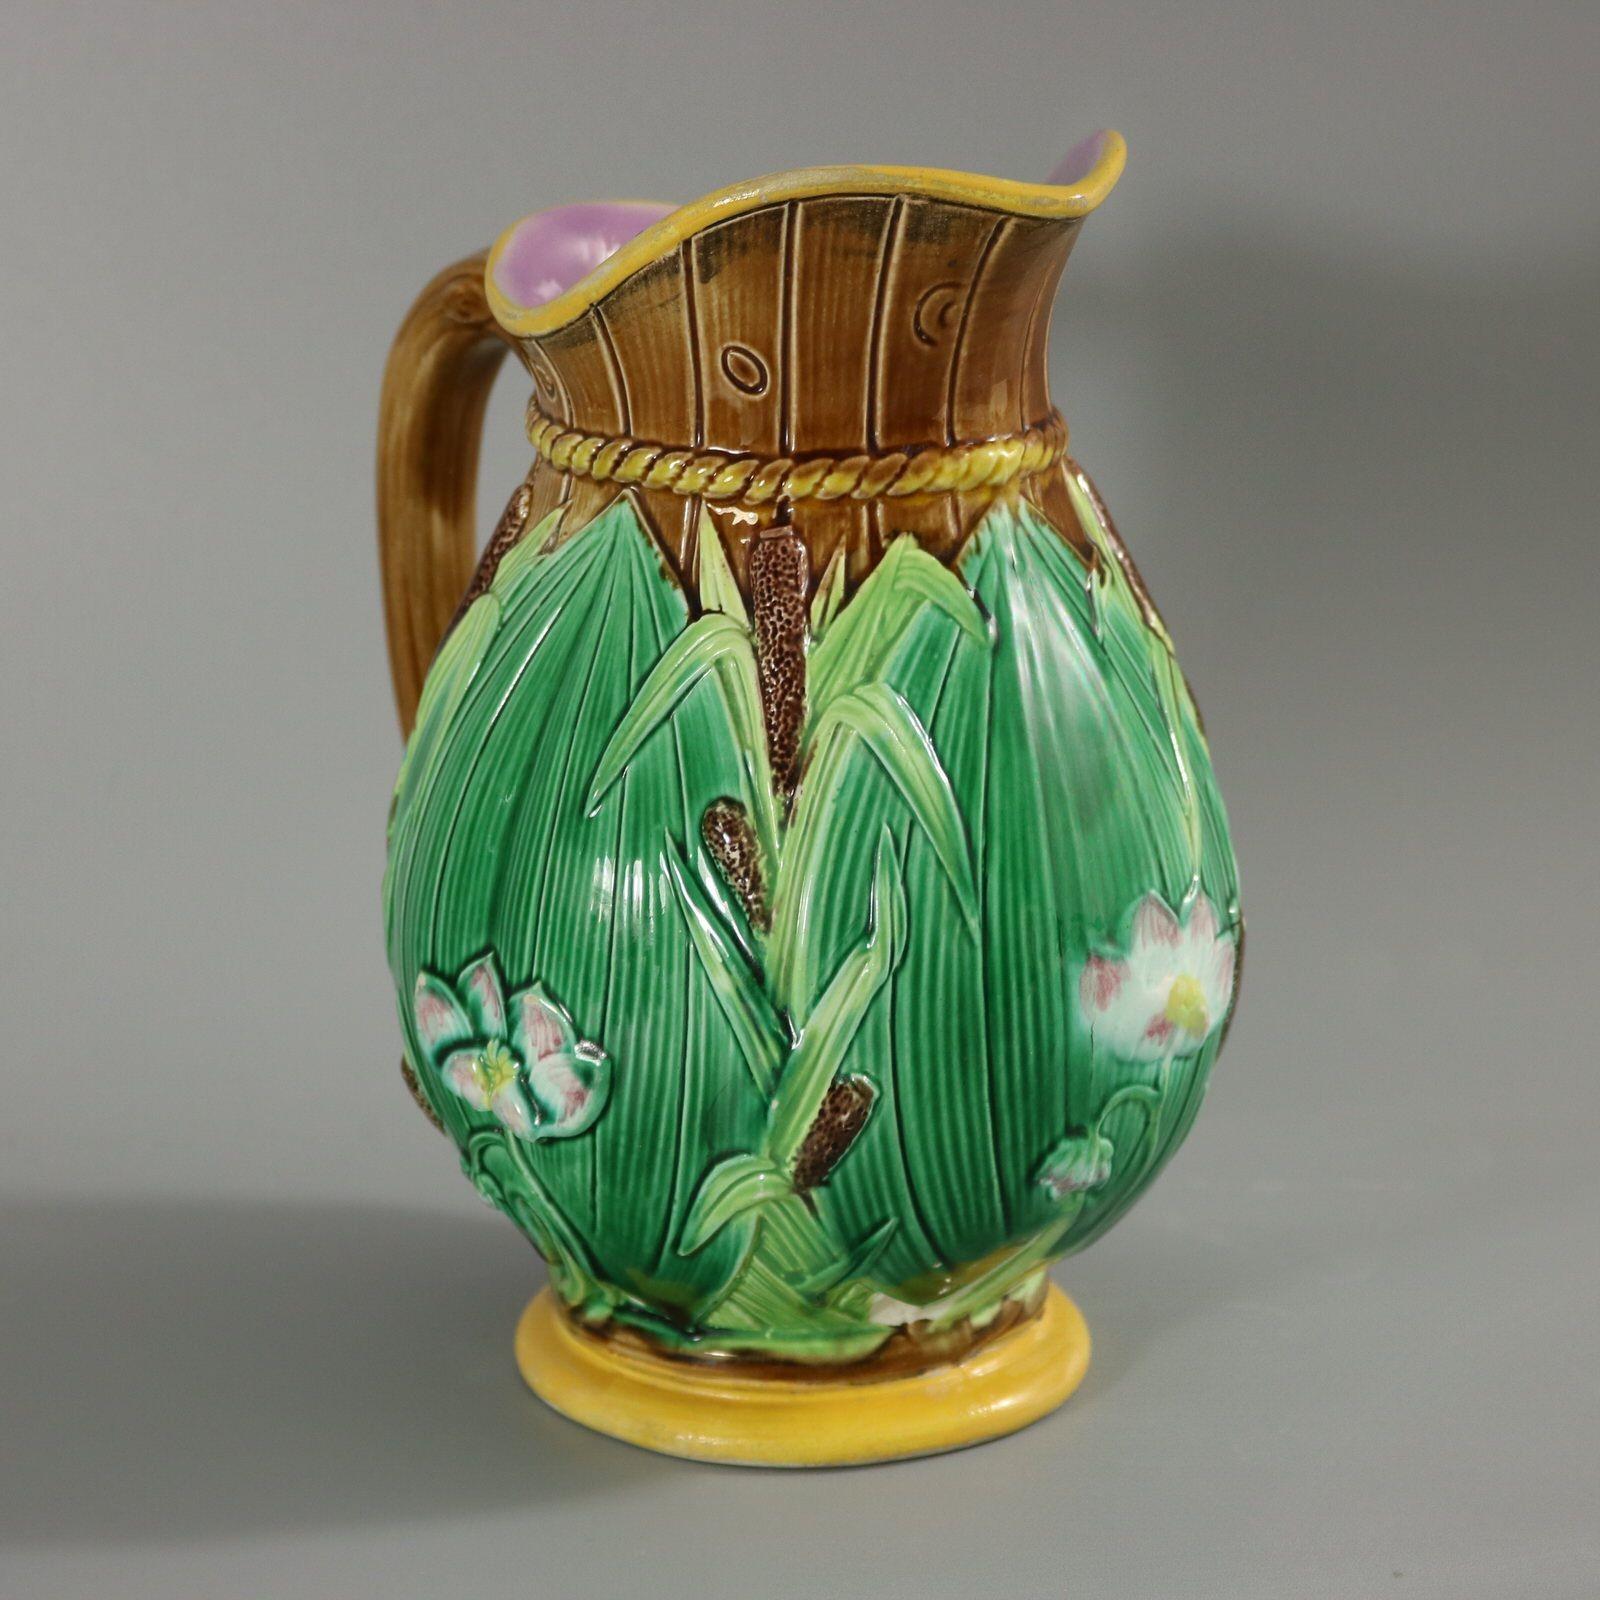 George Jones Majolica Lily on Barrel Jug In Good Condition For Sale In Chelmsford, Essex